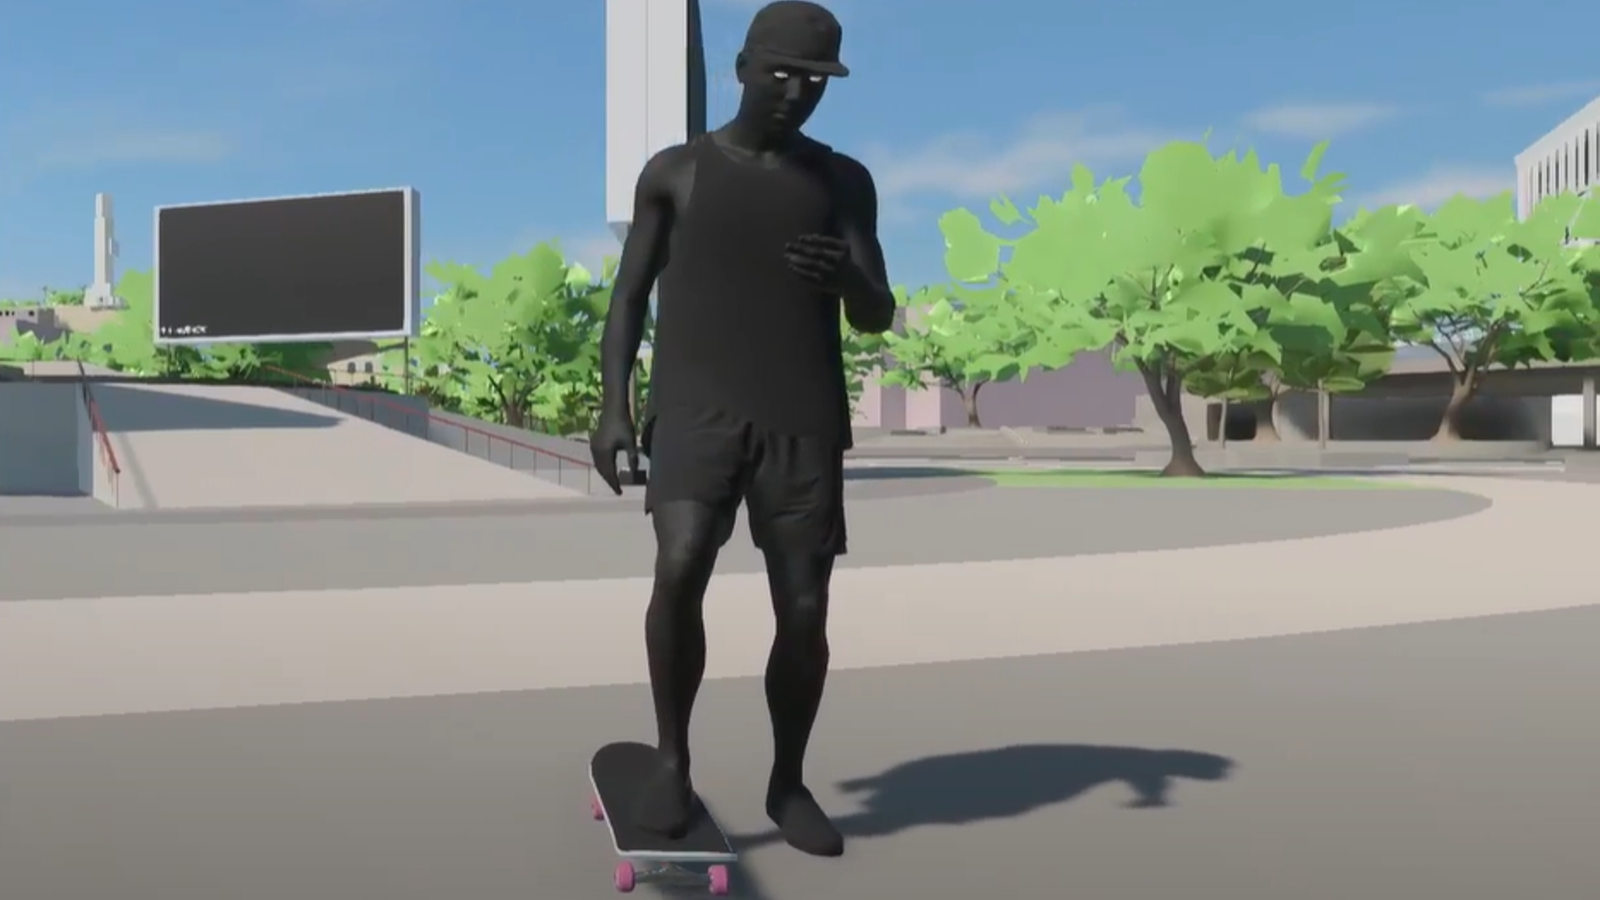 More Skate playtest footage has ollied its way online